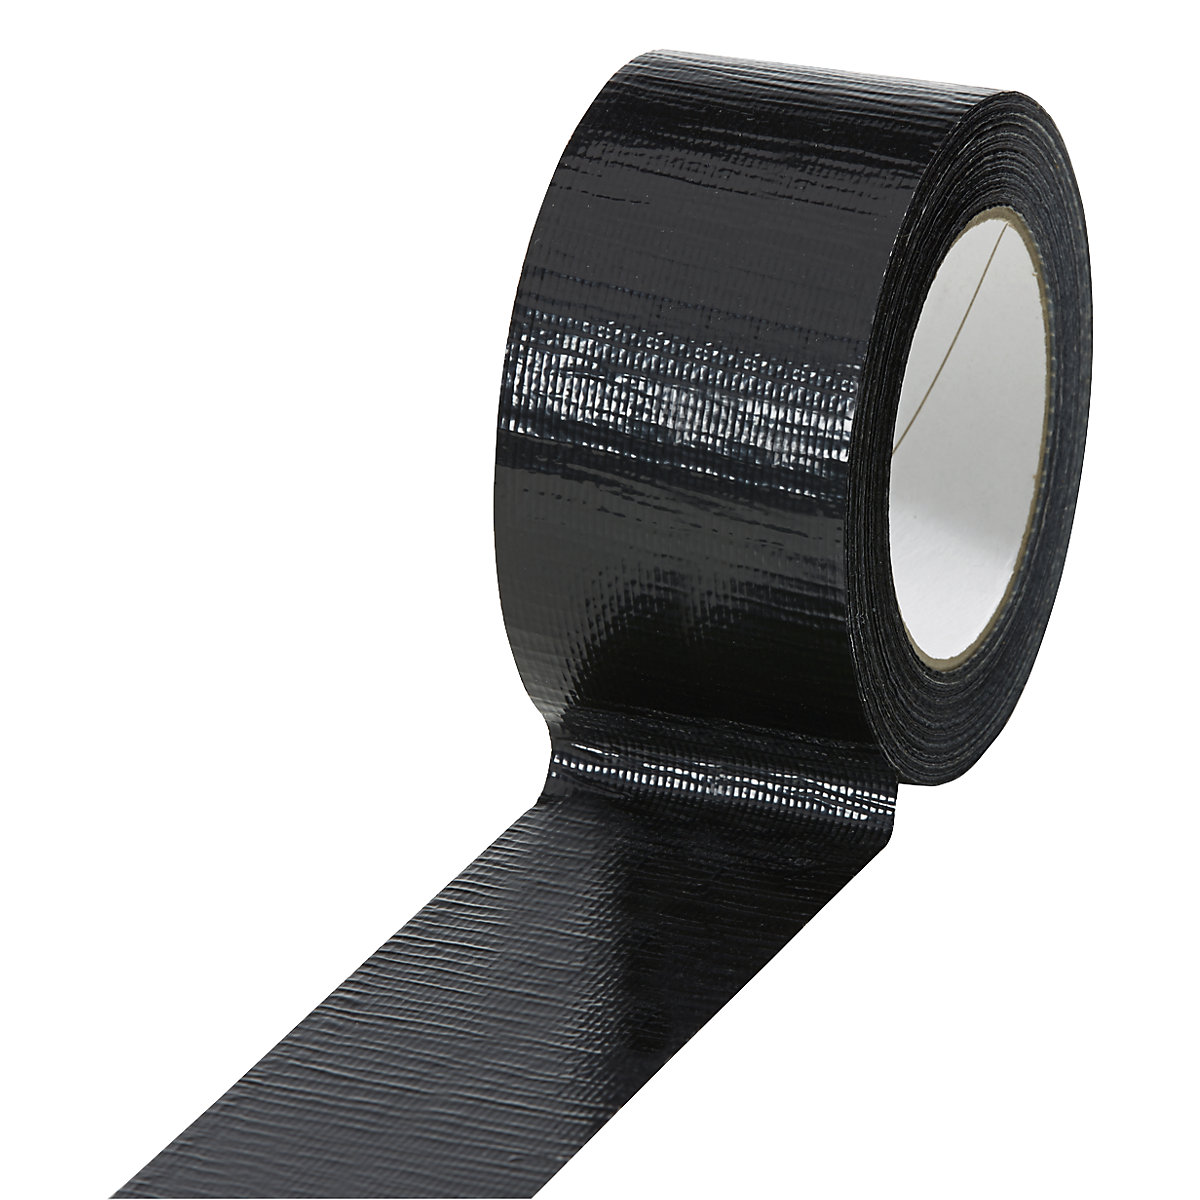 Fabric tape, in different colours, pack of 18 rolls, black, tape width 50 mm-16